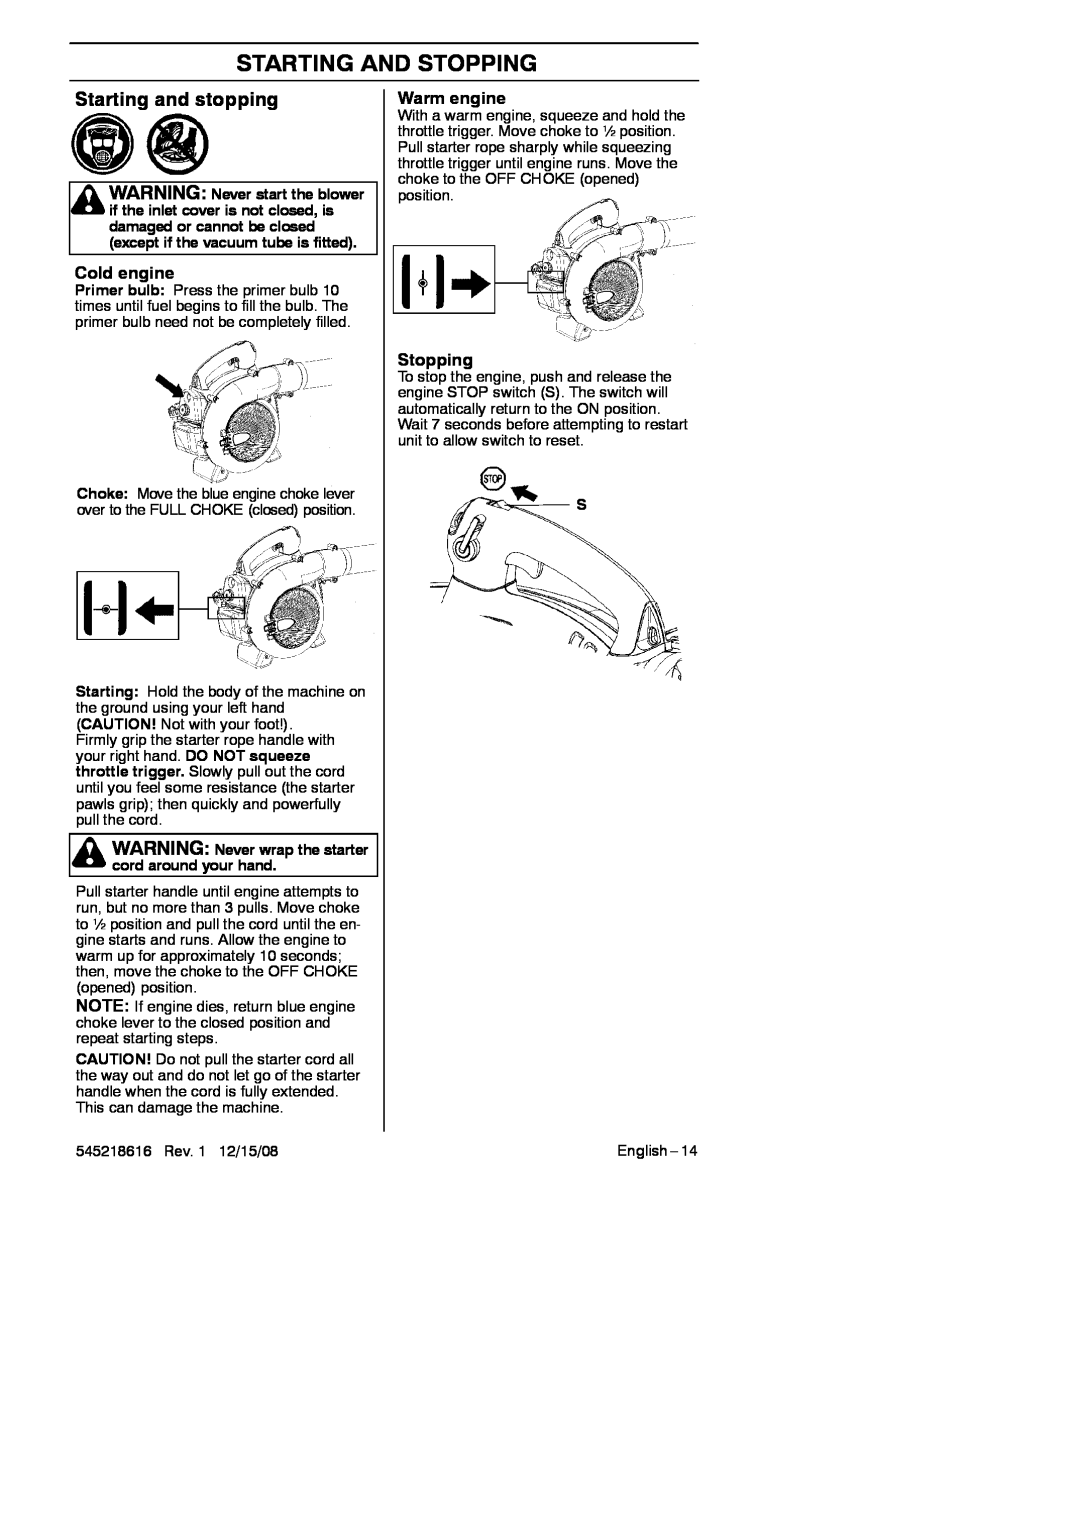 RedMax HB280 manual Starting And Stopping, Starting and stopping, Cold engine, Warm engine 